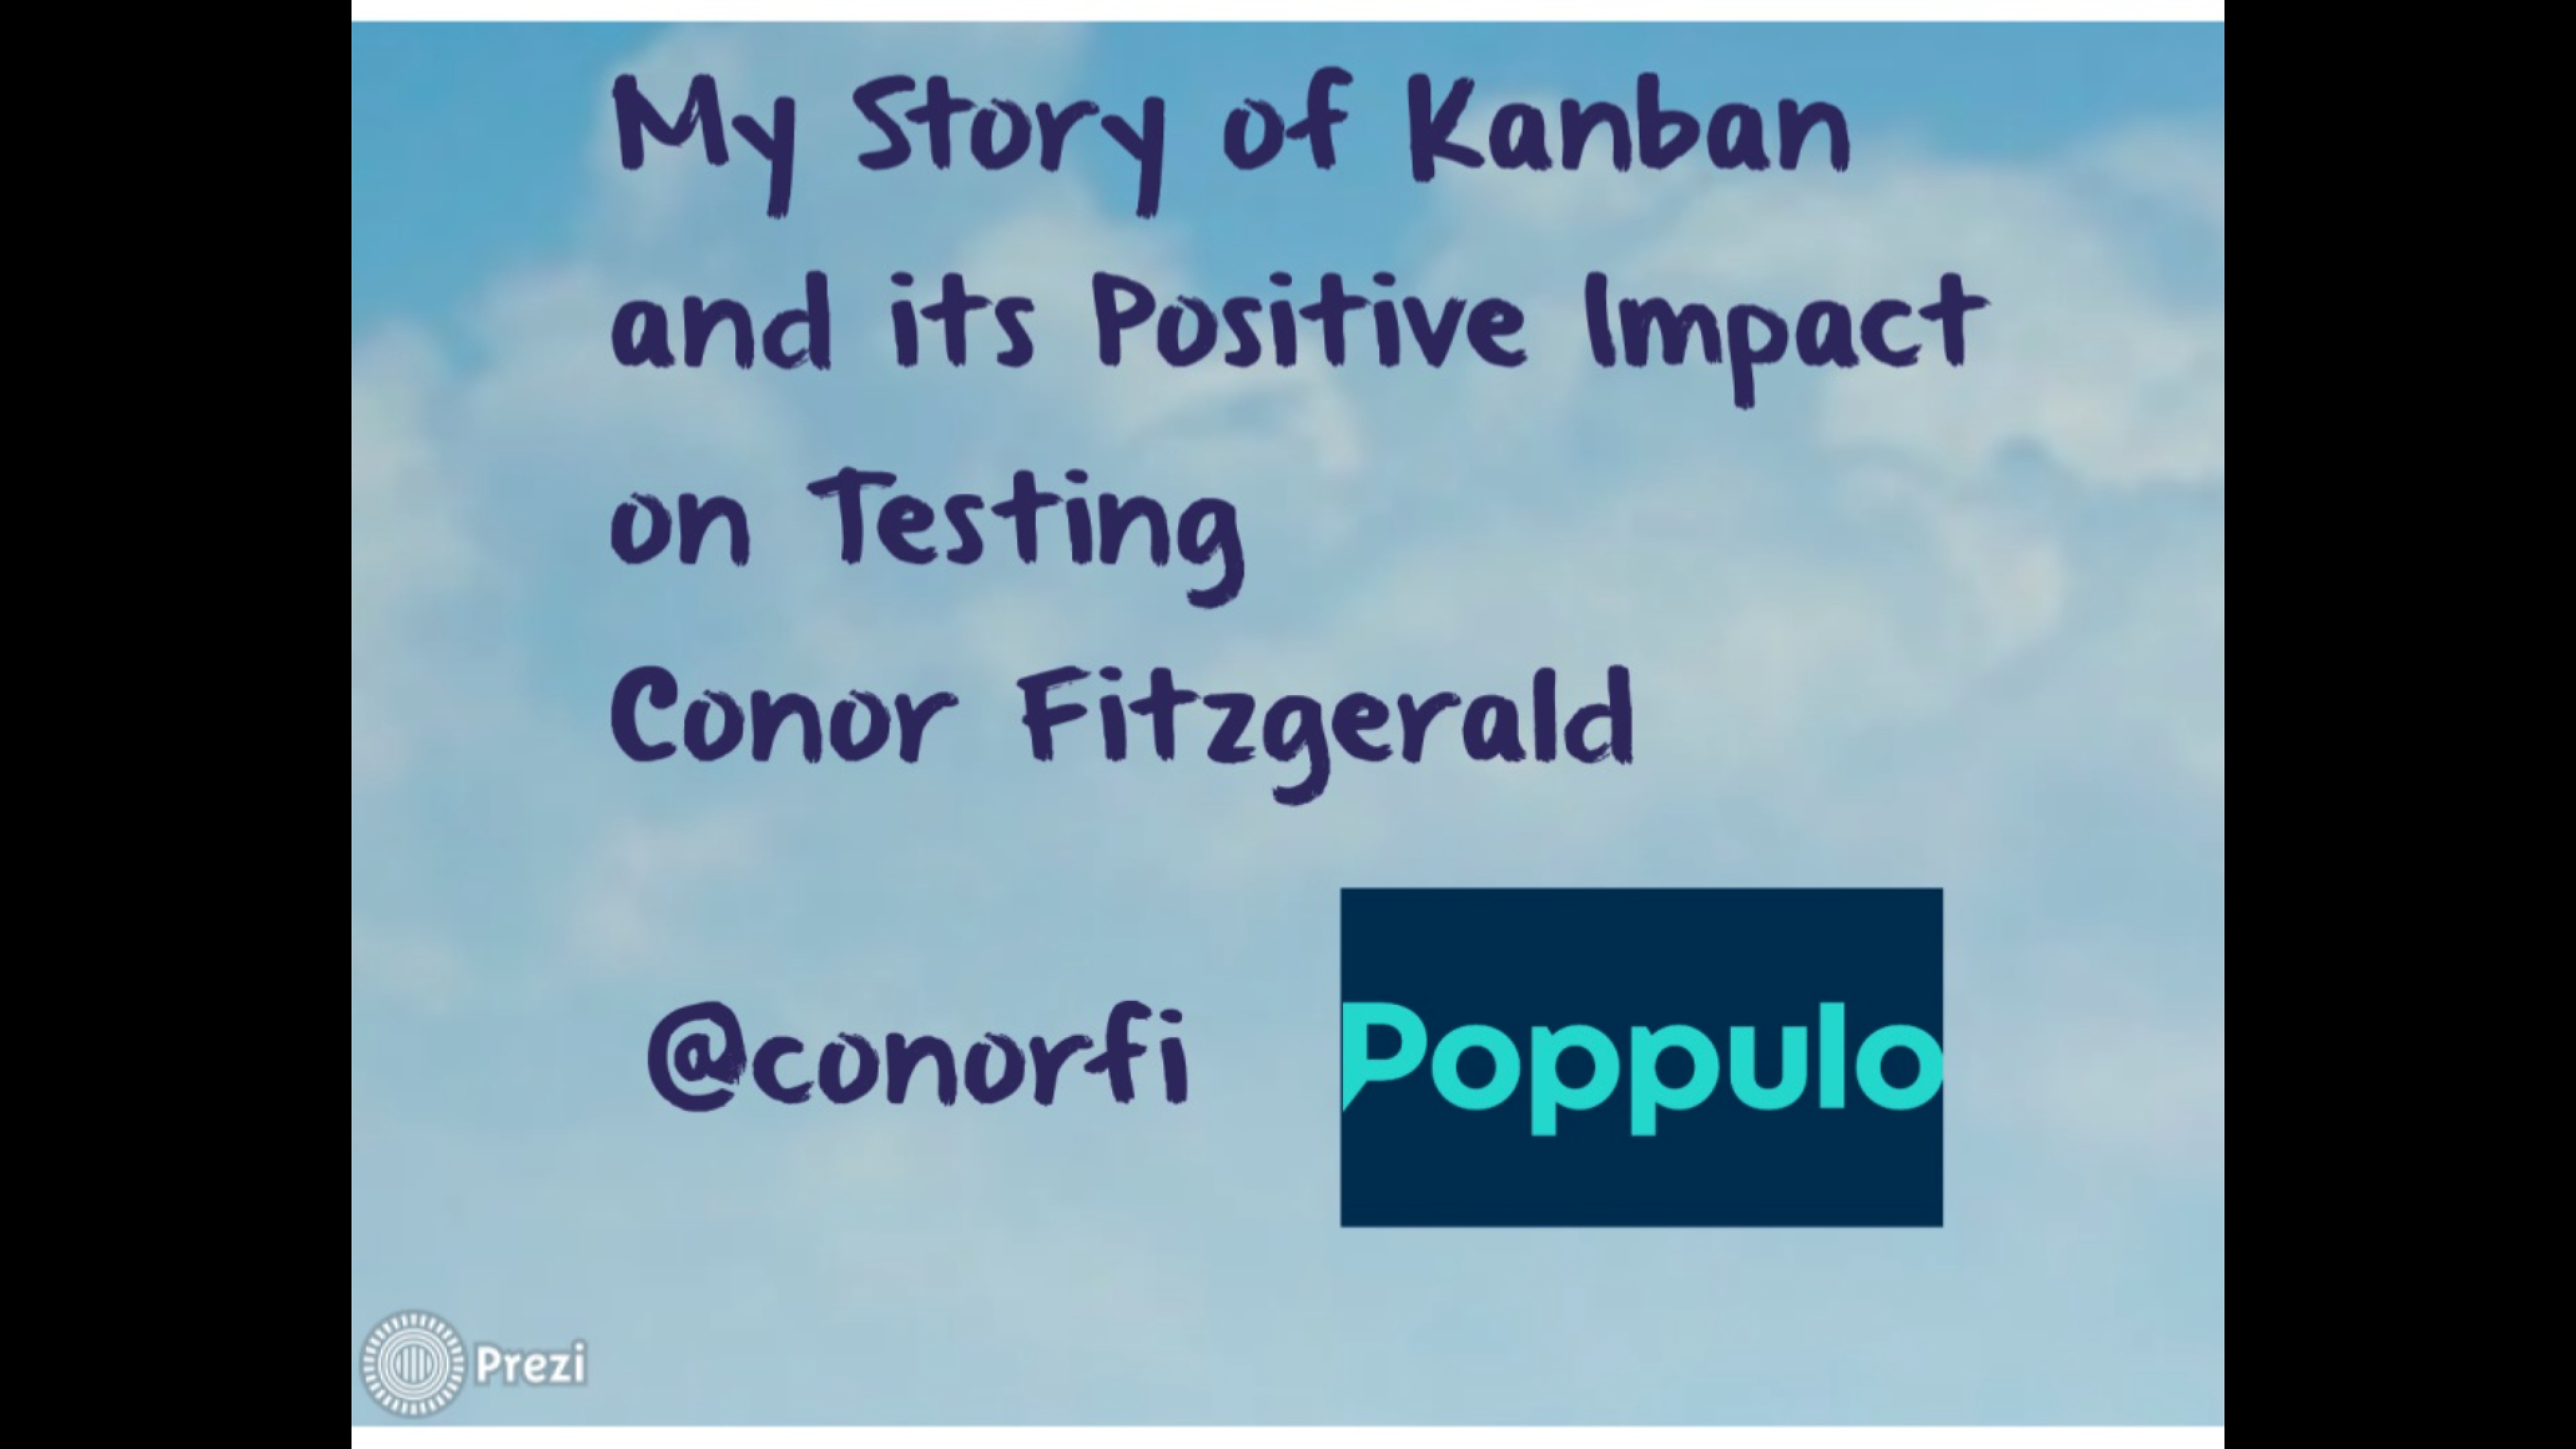 My Story of Kanban and Its Positive Impact on Testing - Conor Fitzgerald